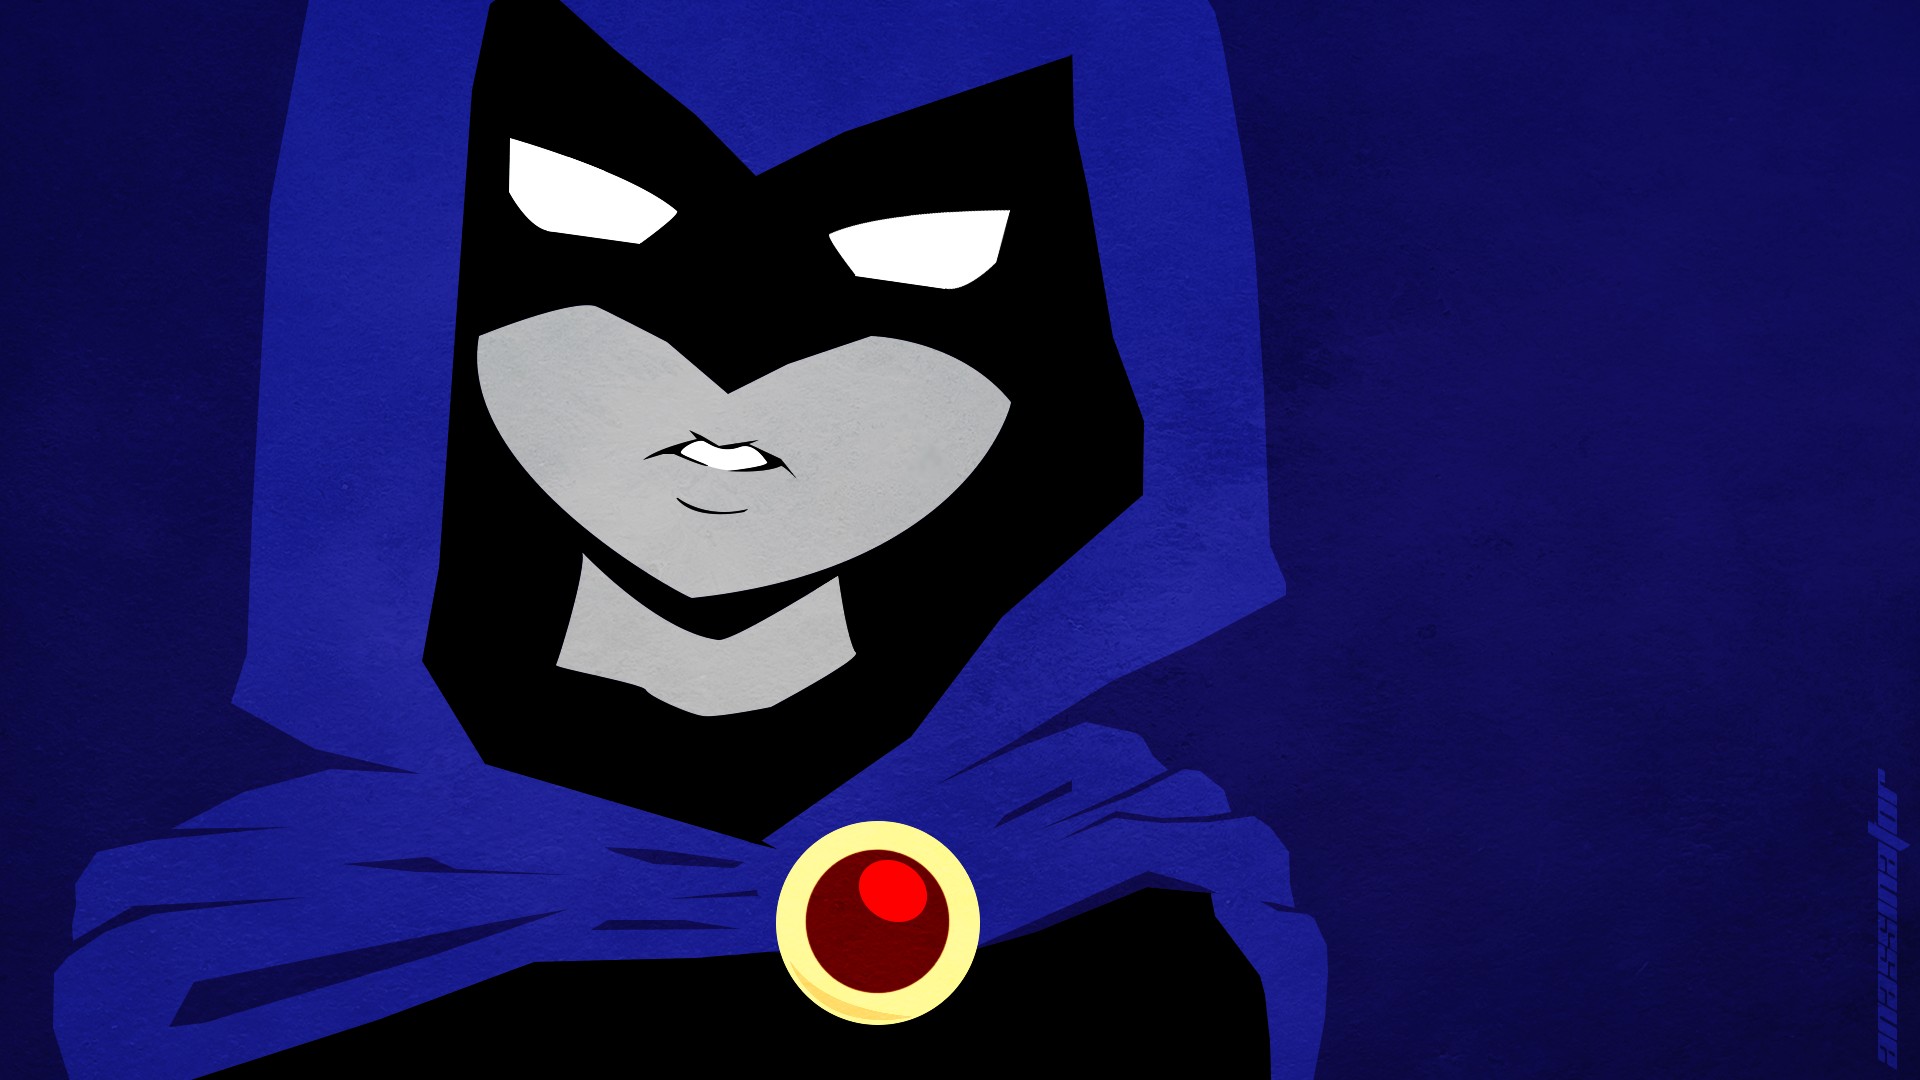 3. Raven from Teen Titans - wide 6